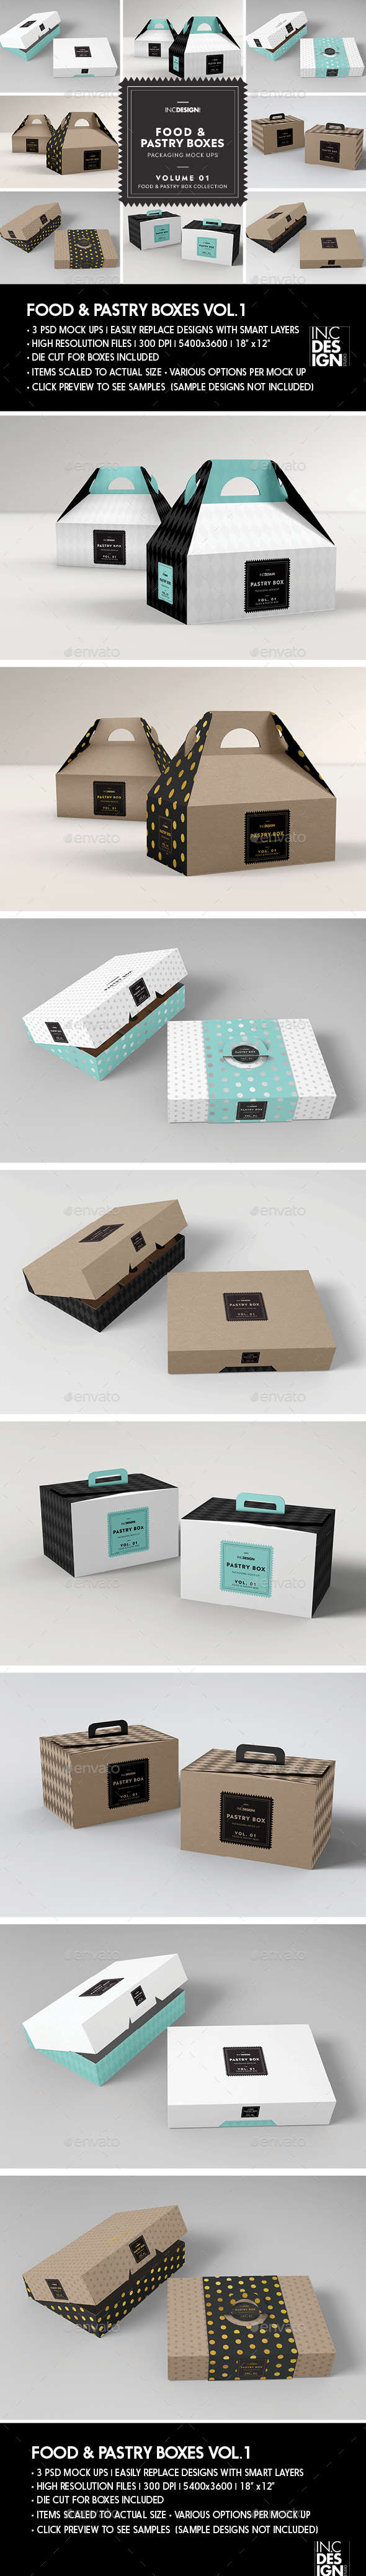 Fast Food Boxes Vol.1: Take Out Packaging MockUps, Graphic Templates -  Envato Elements